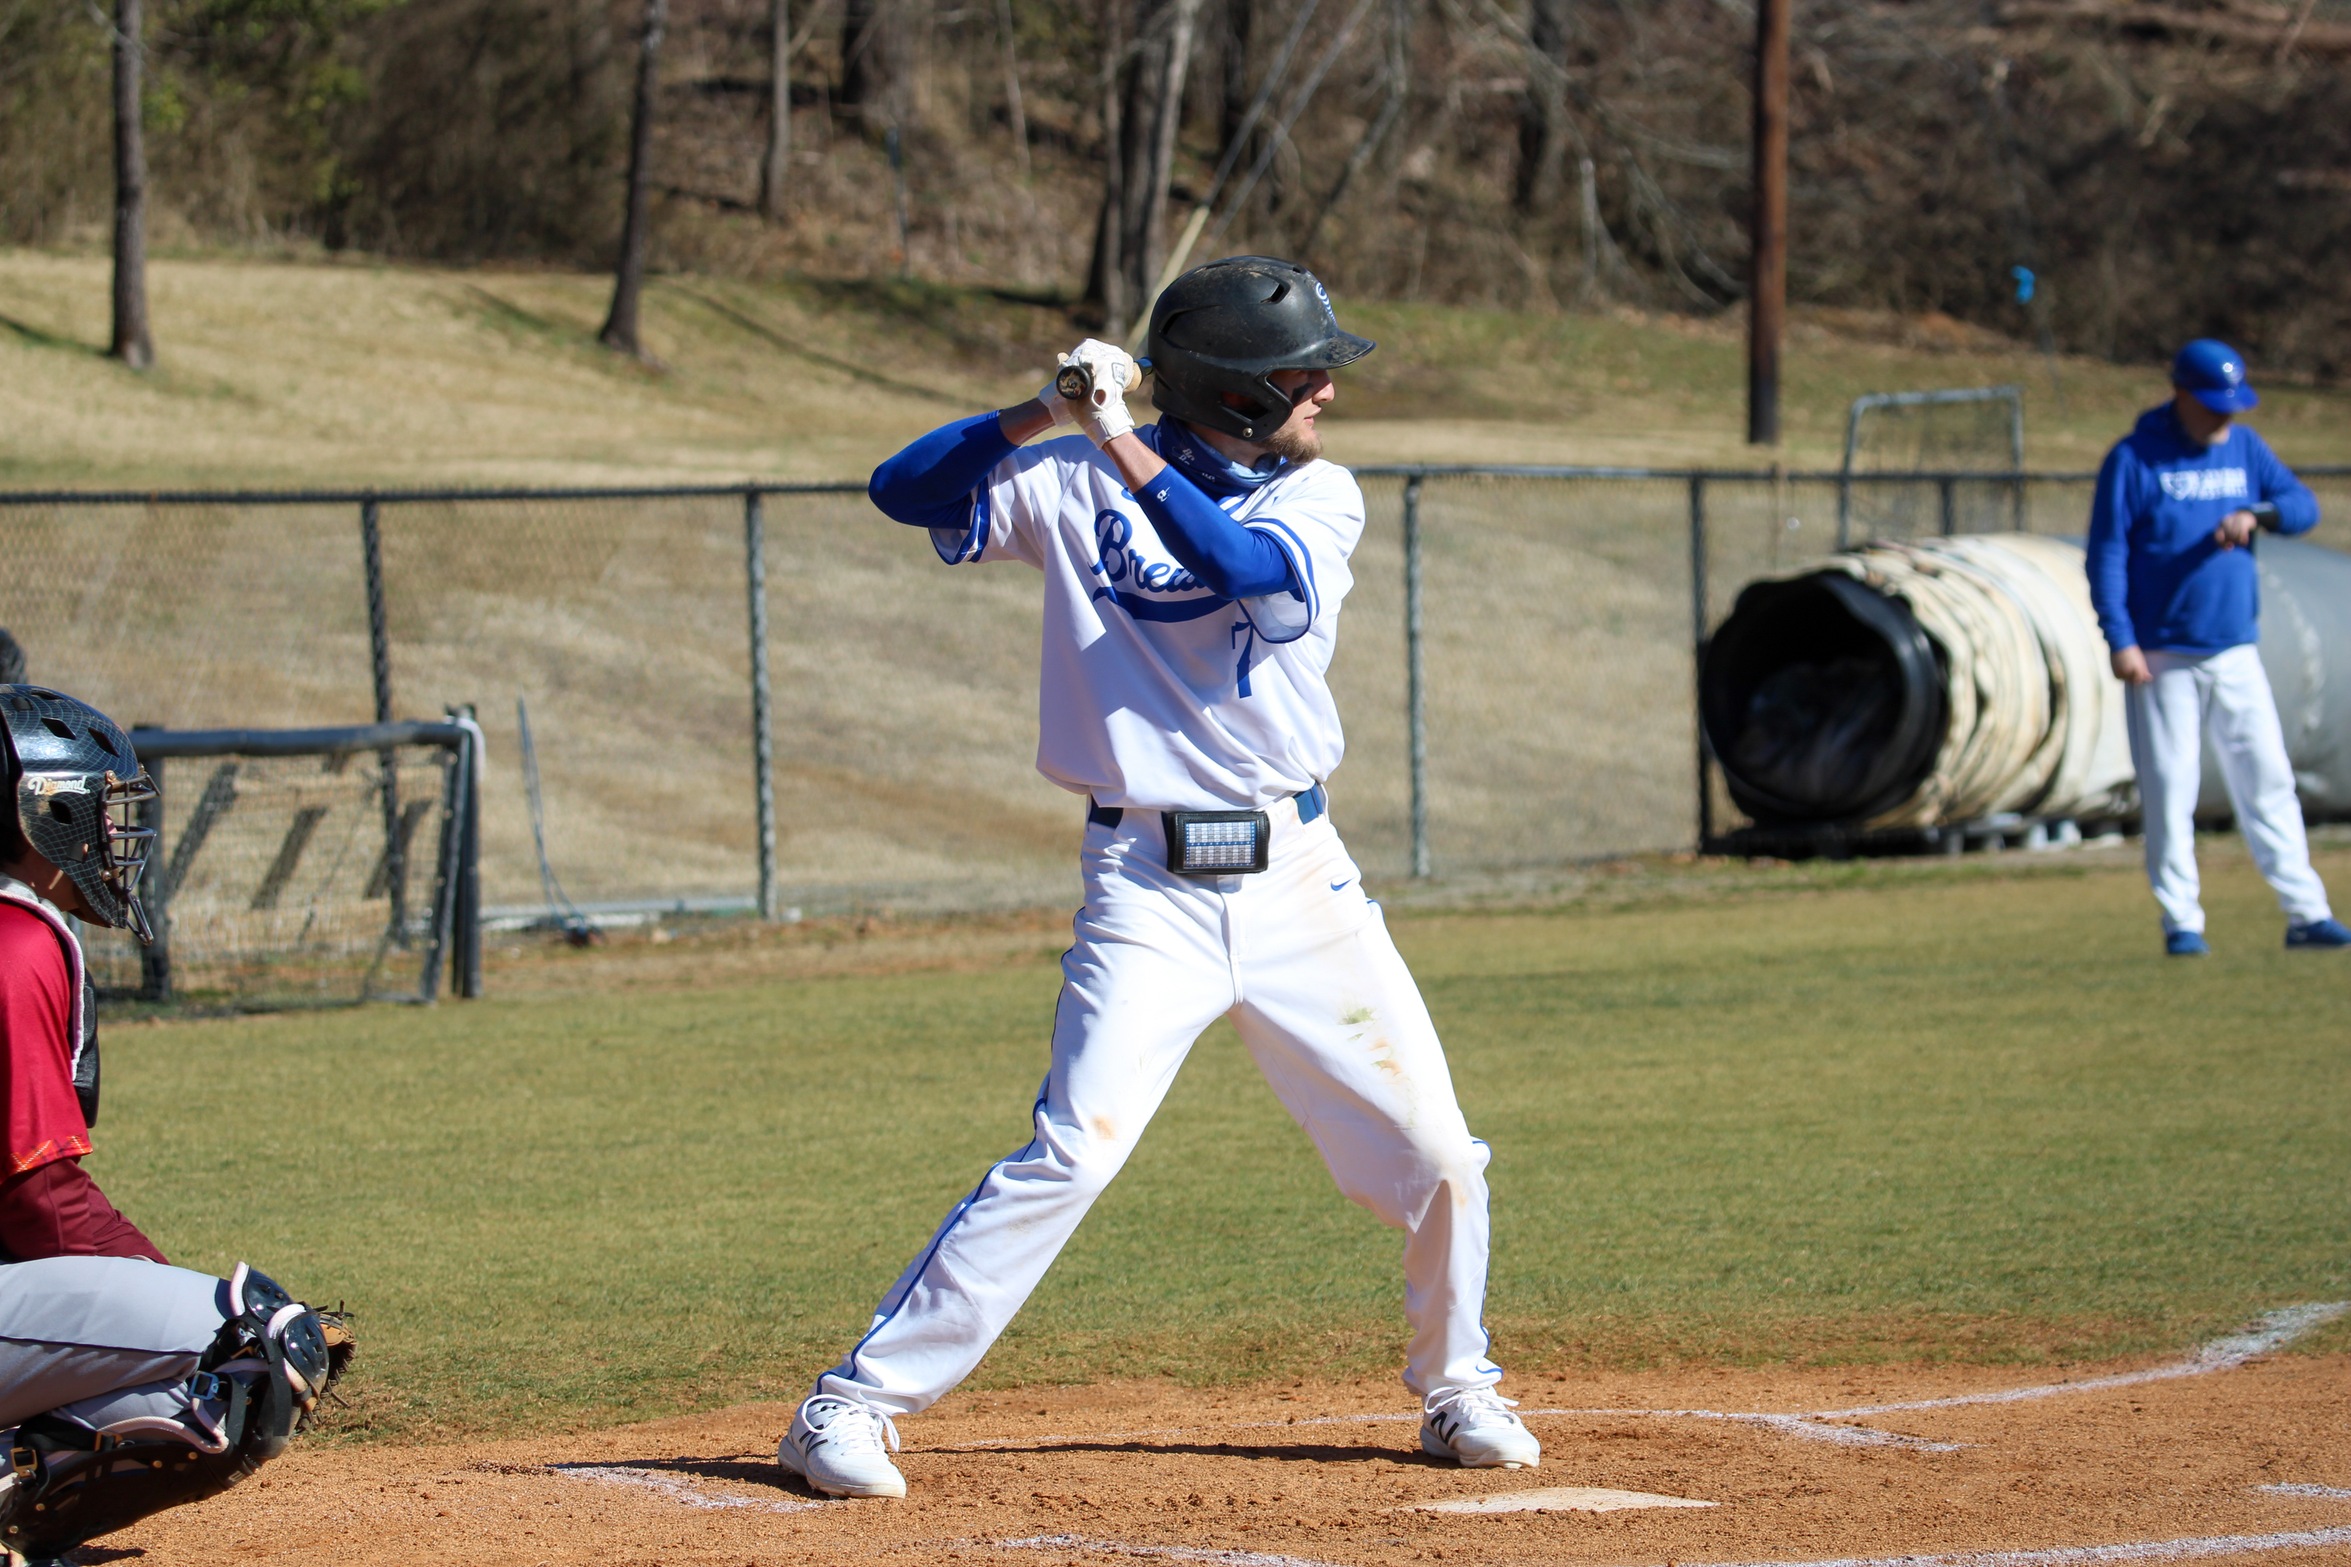 Zach Allison drove in a game-high three RBI's in Brevard's midweek victory over Pfeiffer, 9-3 (Photo courtesy of Brianna Rodibaugh '24).